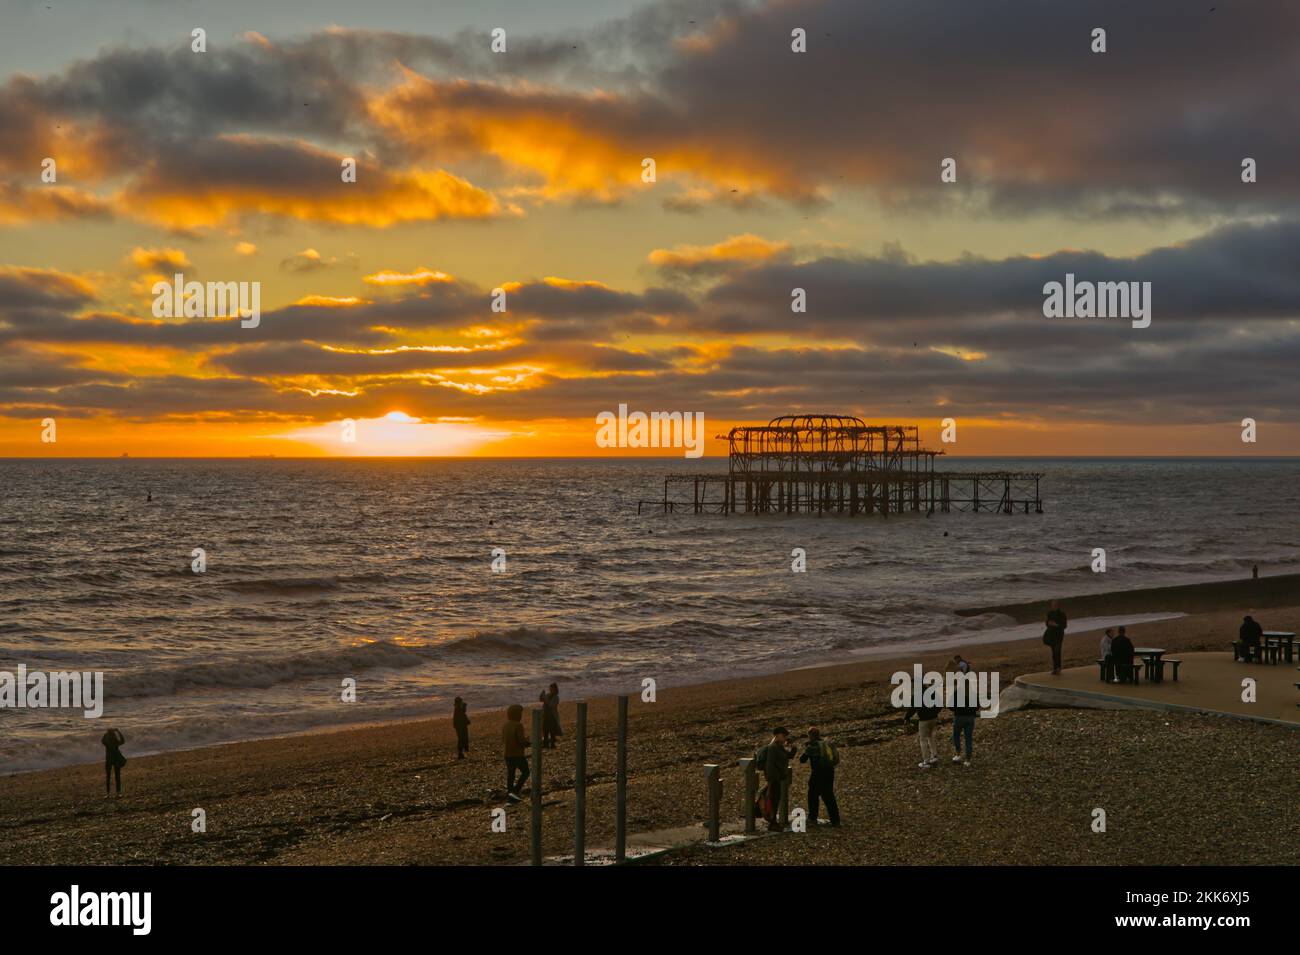 Ruined West Pier, seafront and beach in sunset with people. Brighton in East Sussex, England Stock Photo